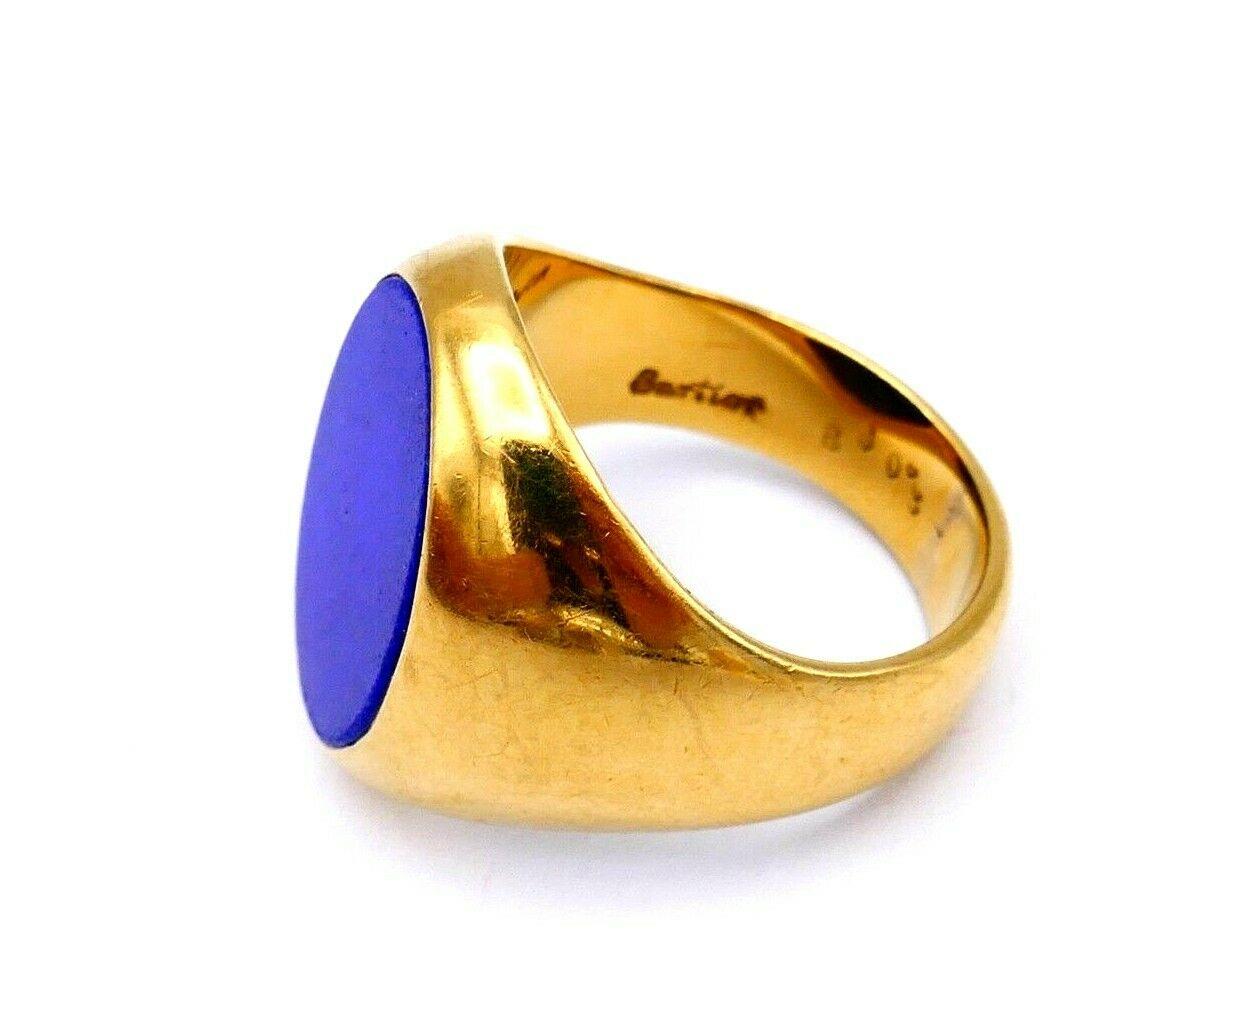 A vintage signet ring by Cartier. Made of 18k yellow gold and lapis lazuli. Stamped with Cartier maker's mark, a serial number and a hallmark for 18k gold. 
Measurements: the ring size is 6.5. Front part is 2/3